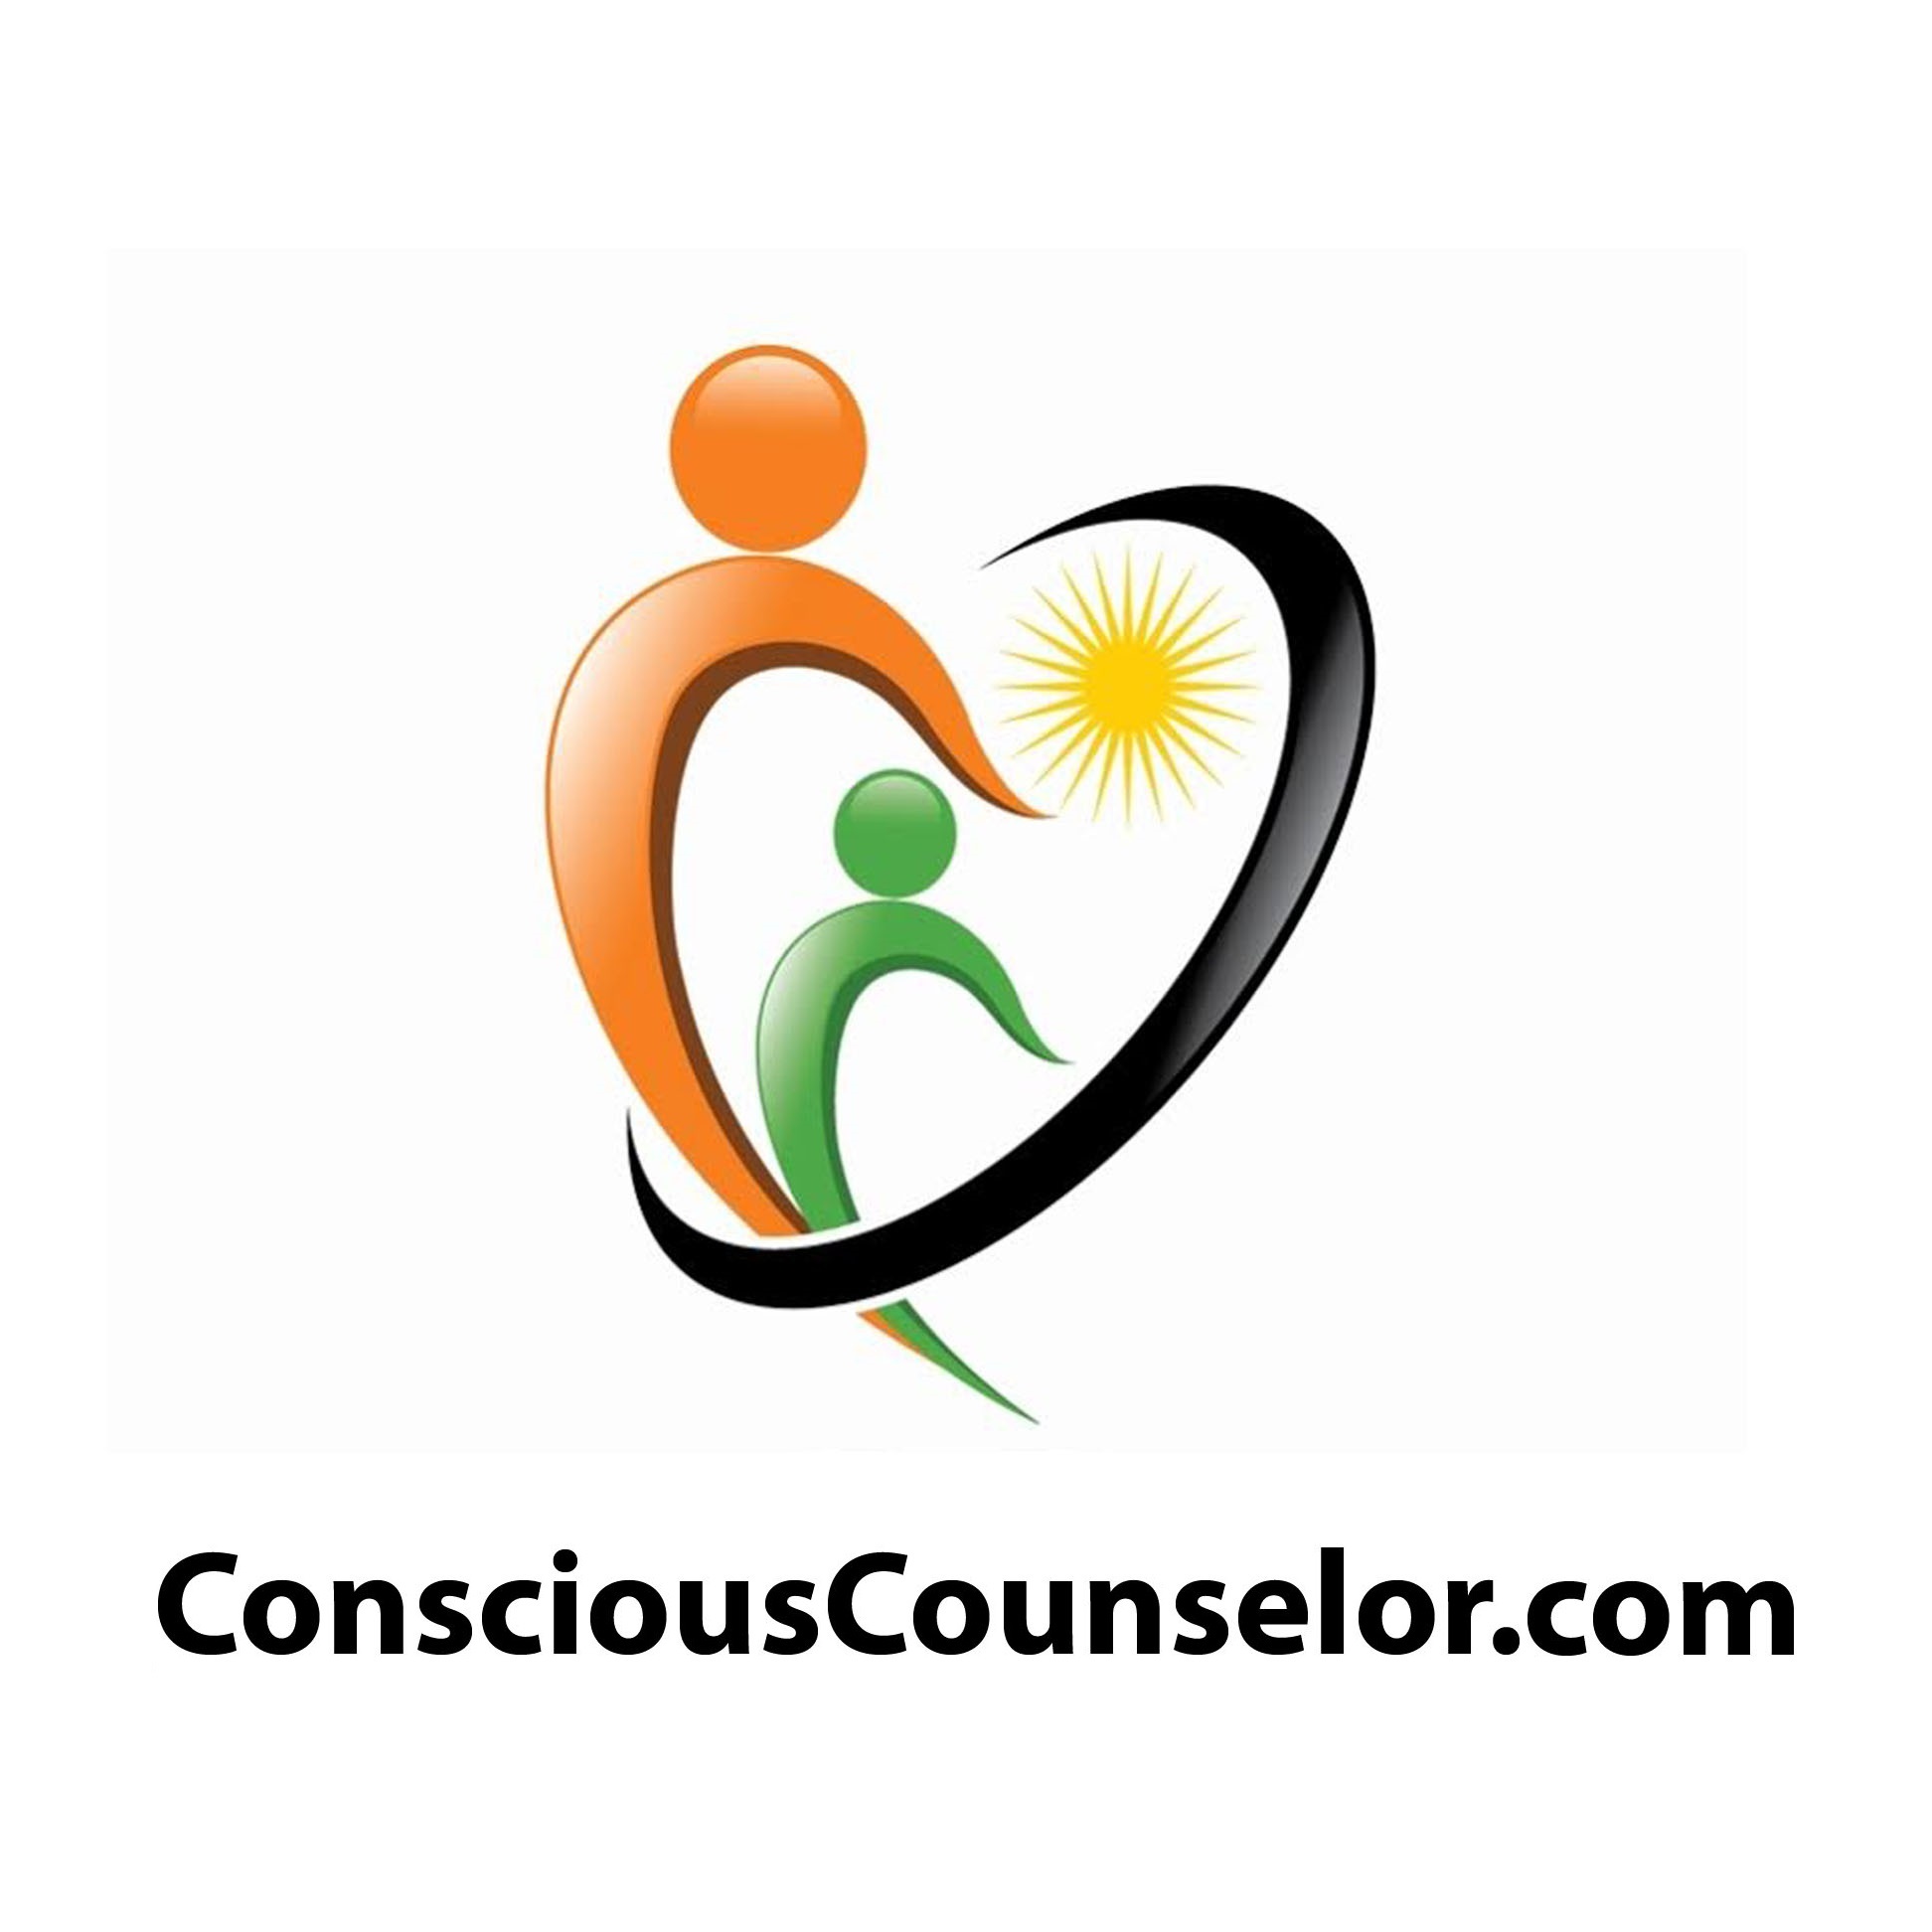 Conscious Counselor asks the question: Is there a natural cure to ADD?